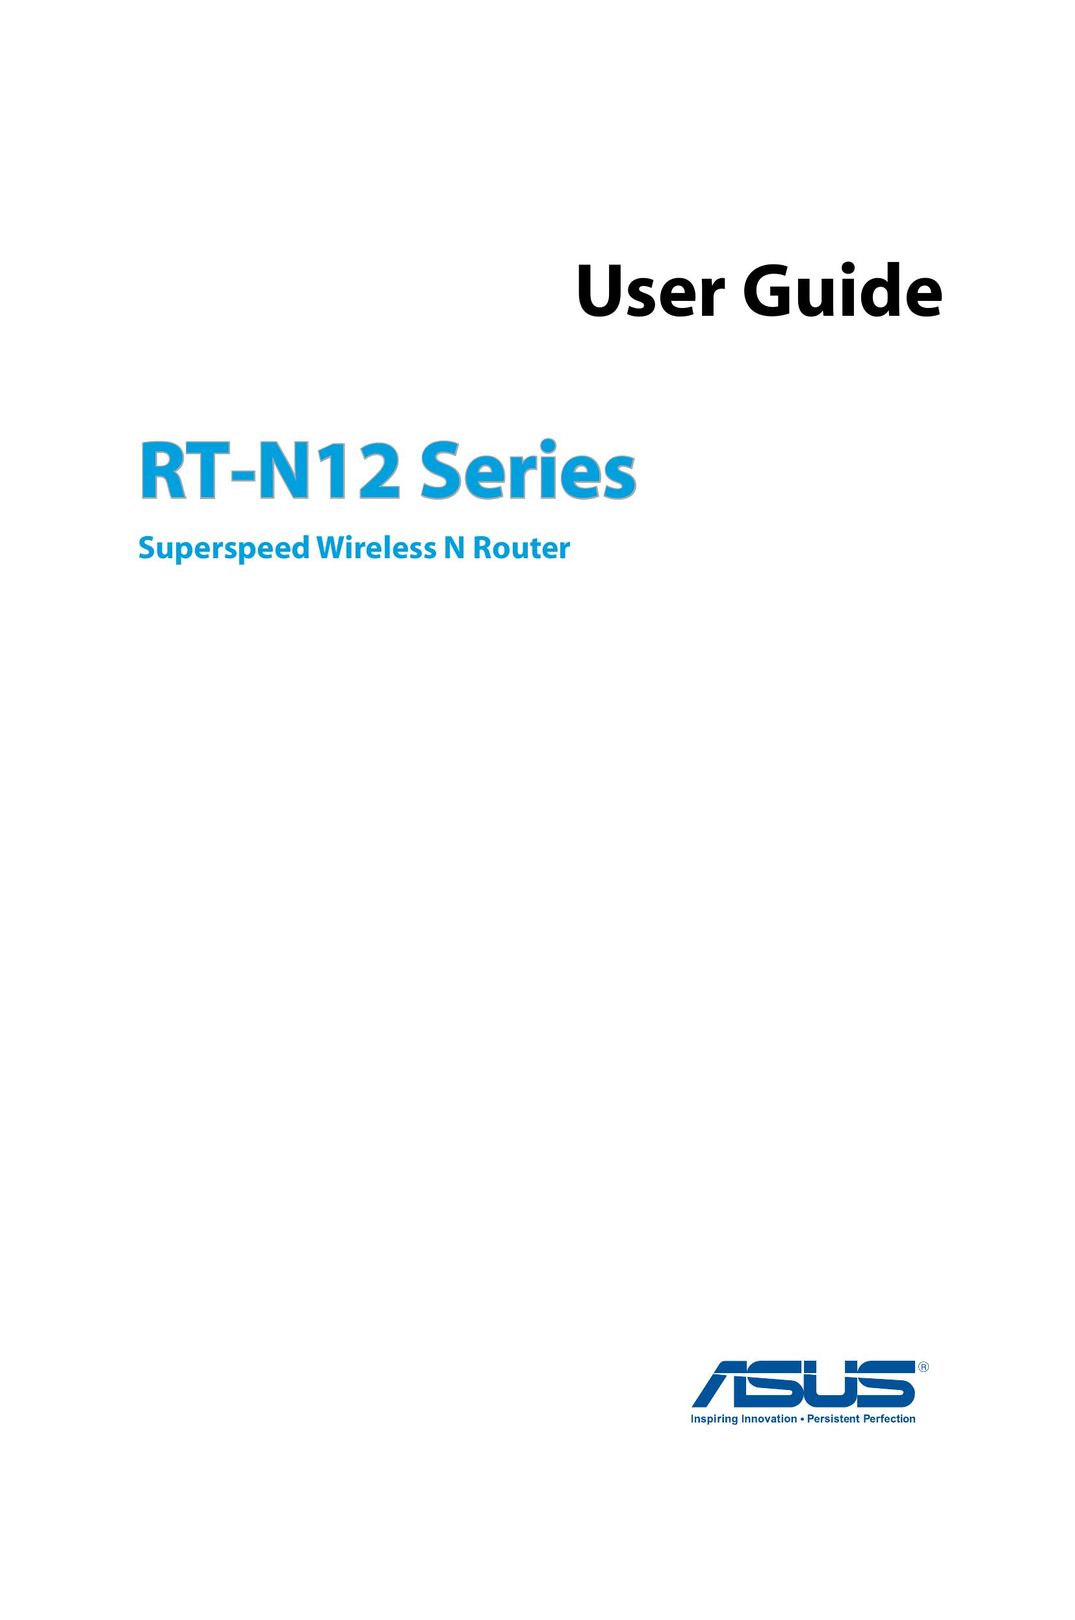 Asus RT-N12 Network Router User Manual